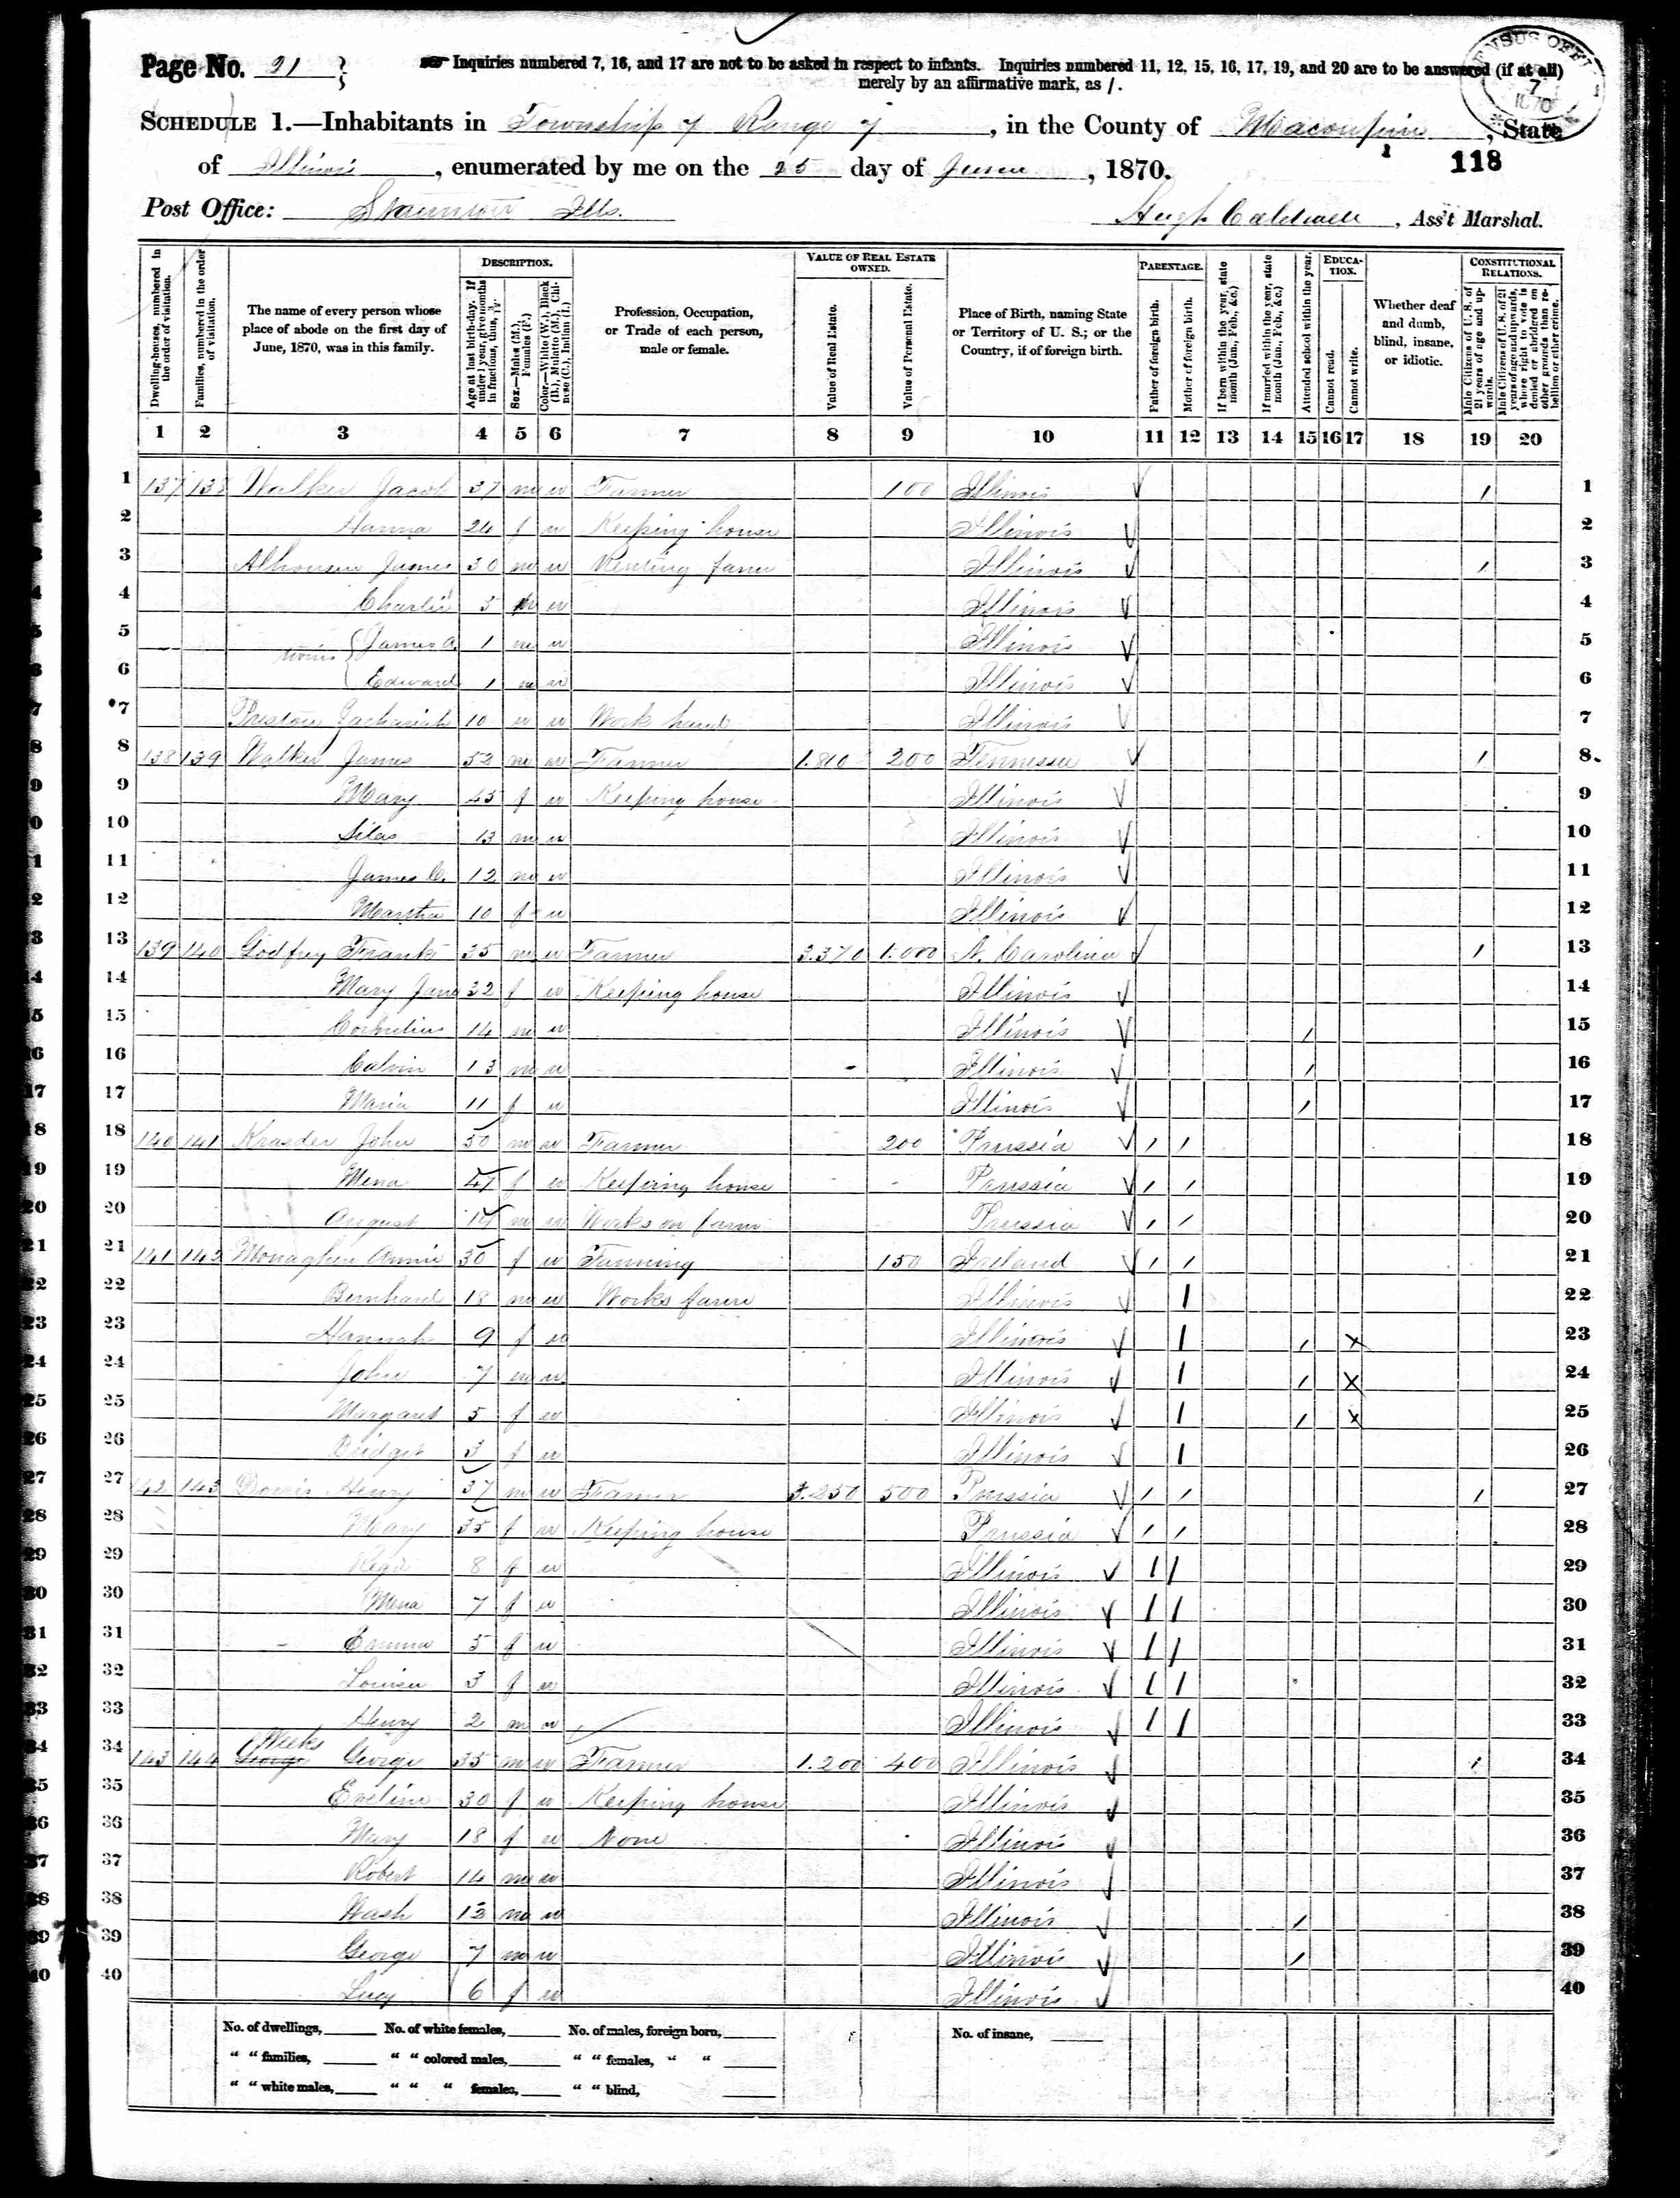 James and Mary (Bentley) Walker, 1870 Macoupin County, Illinois, census